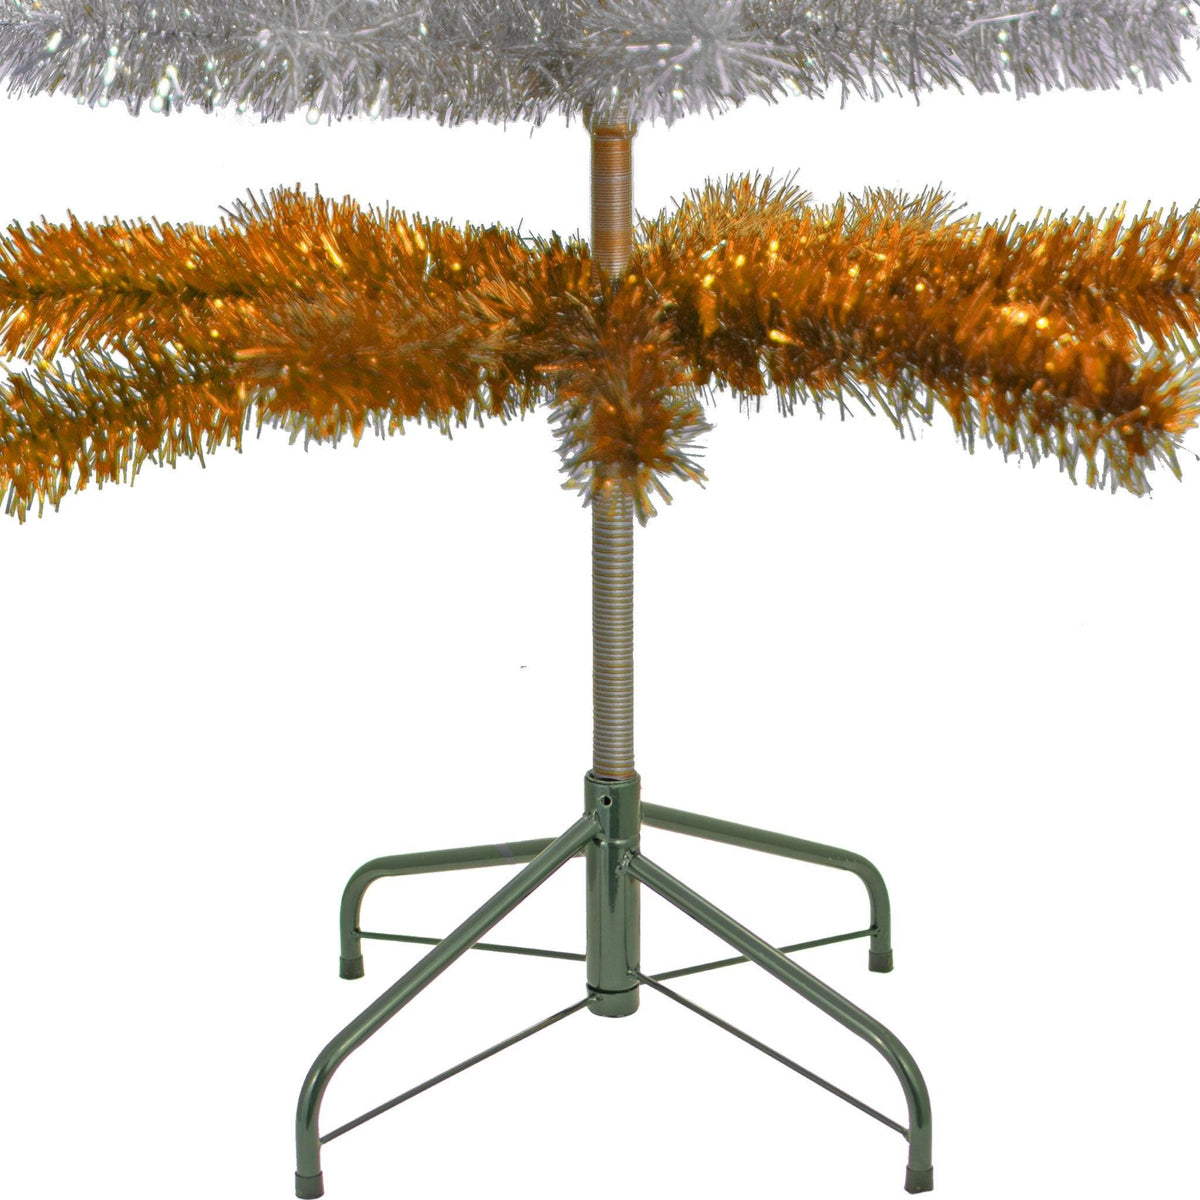 Orange & Silver Layered Tinsel Christmas Trees! Decorate for the holidays with a Shiny Orange and Metallic Silver retro-style Christmas Tree. On sale now at leedisplay.com